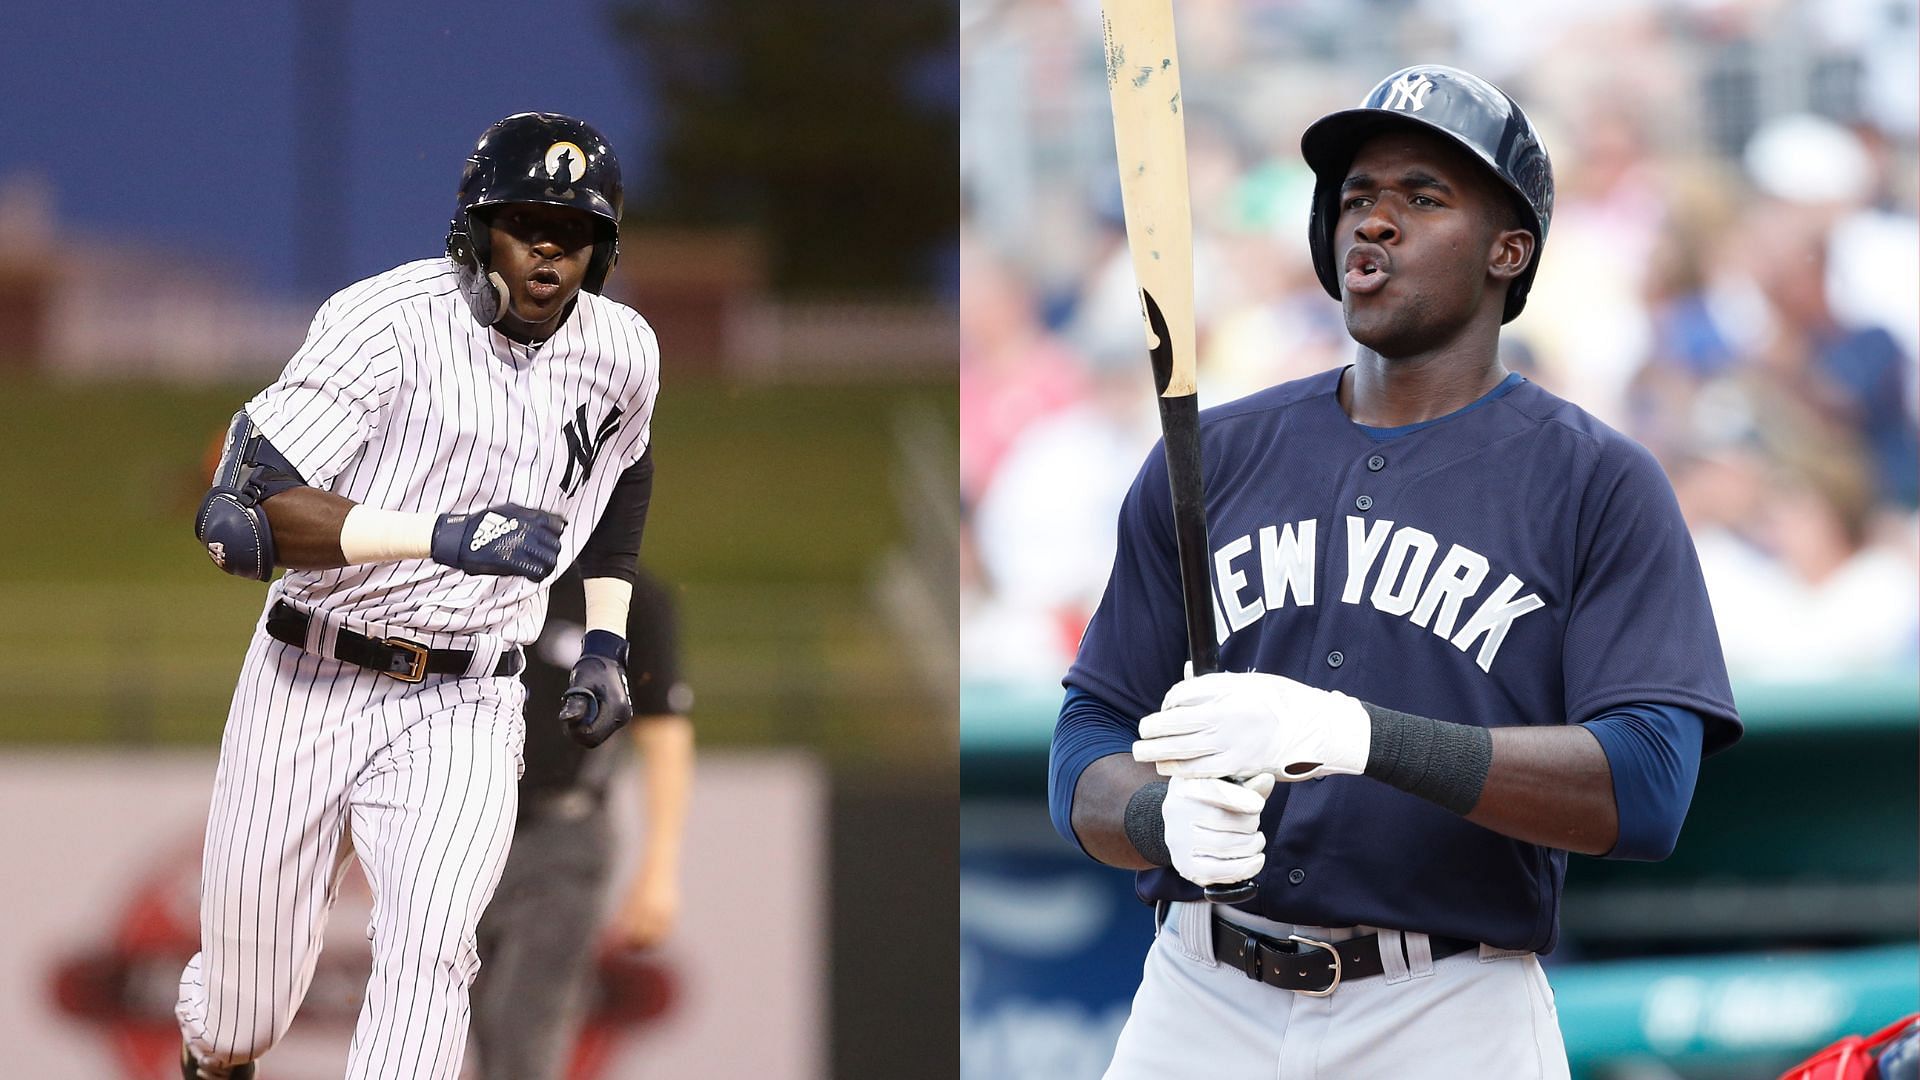 Estevan Florial has been called up to the New York Yankees